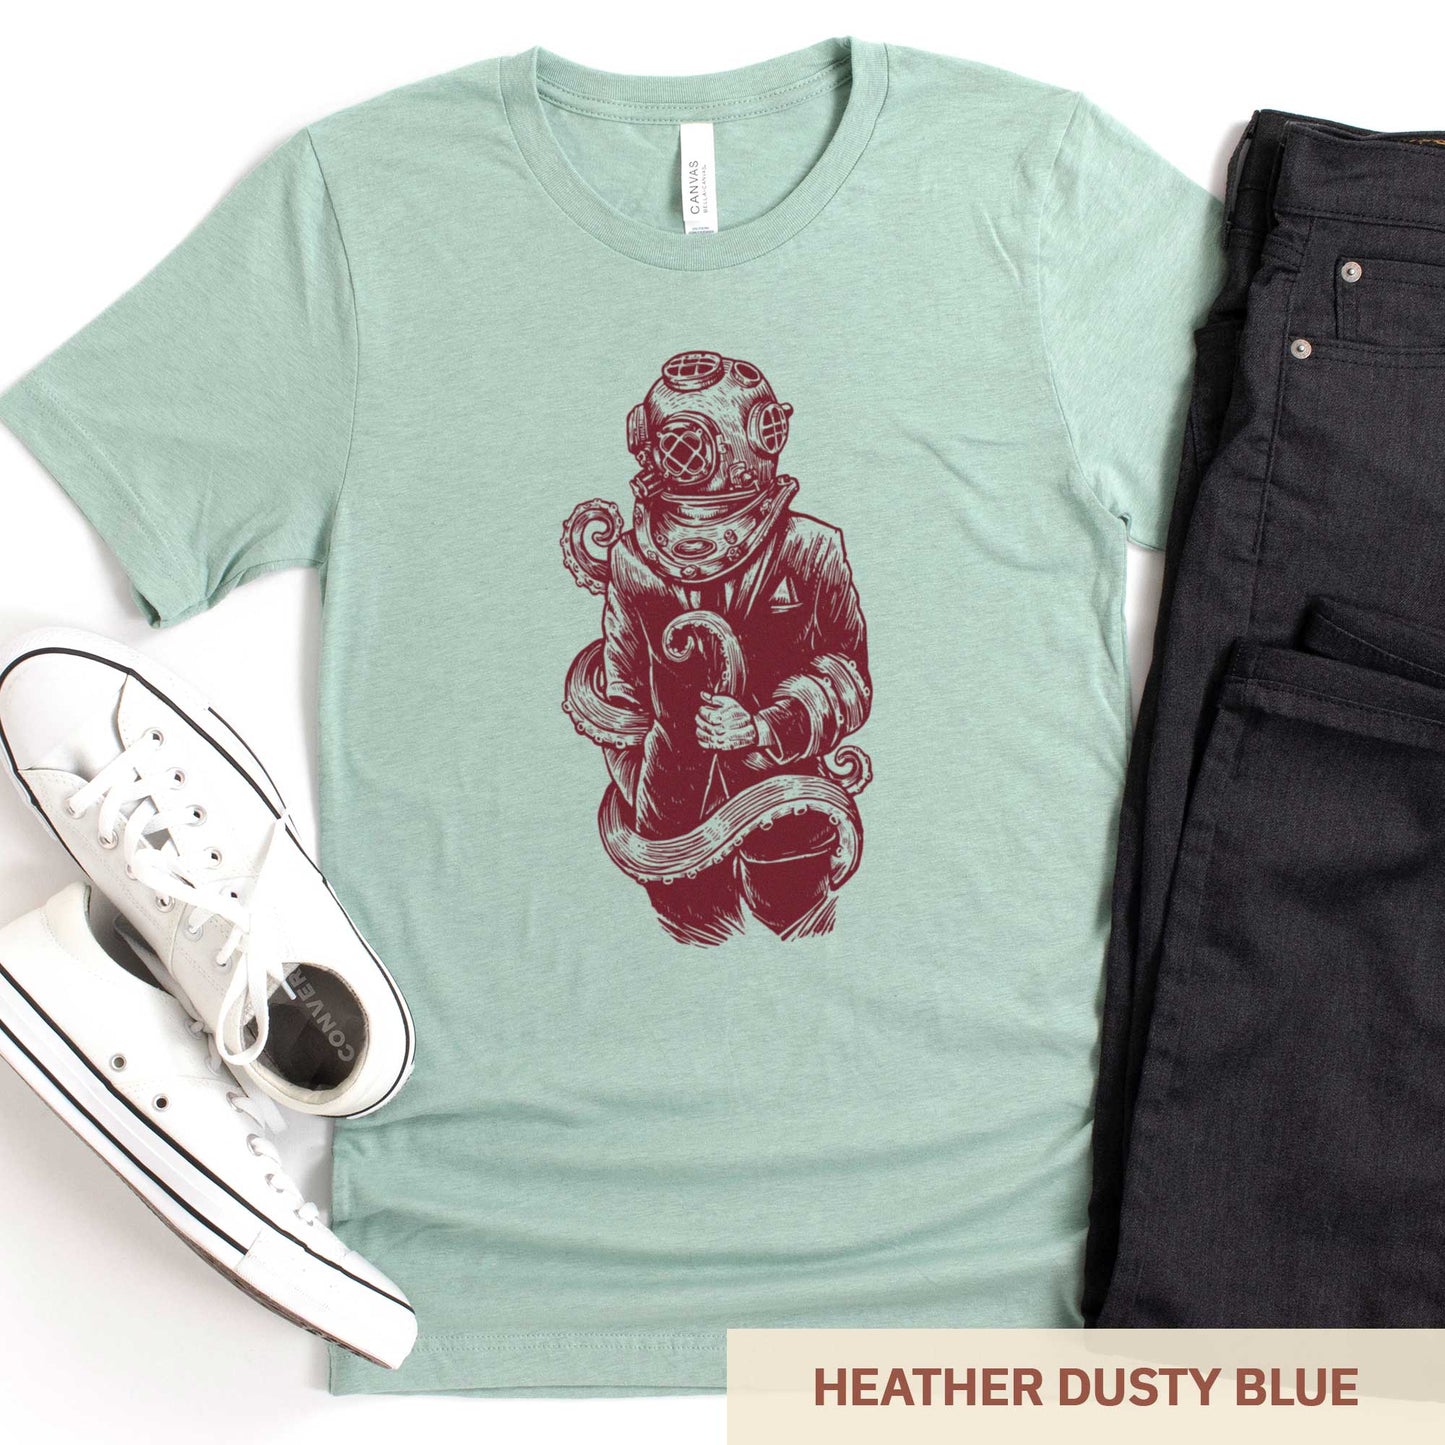 A heather dusty blue Bella Canvas t-shirt featuring a figure in a business suit wearing a vintage diver's helmet with octopus tentacles wrapped around them.